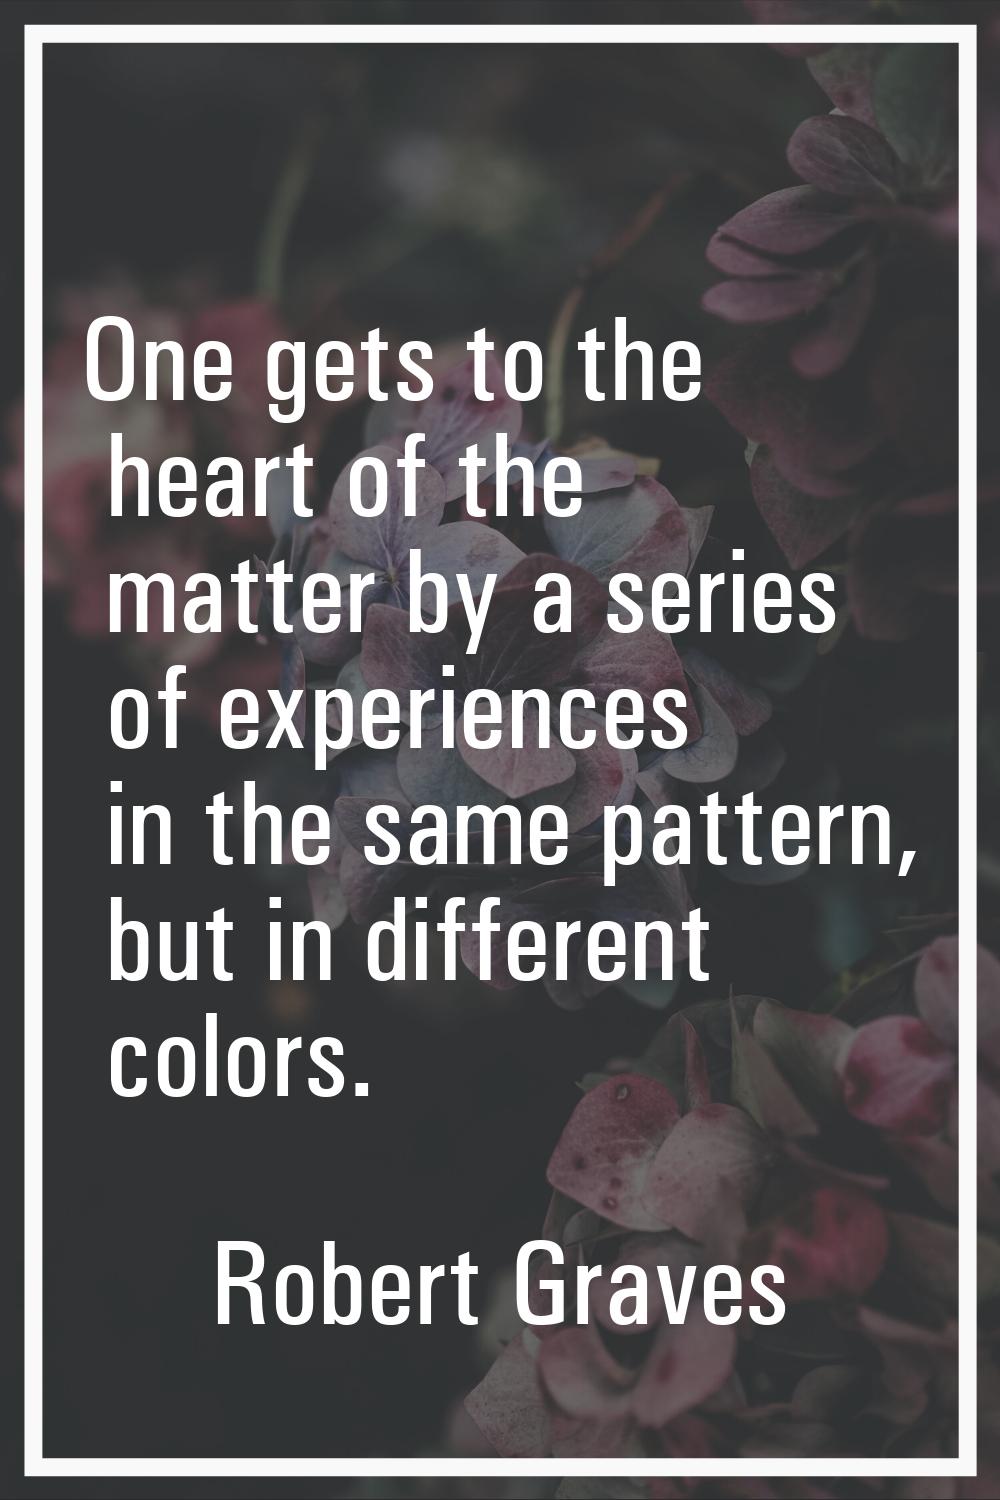 One gets to the heart of the matter by a series of experiences in the same pattern, but in differen